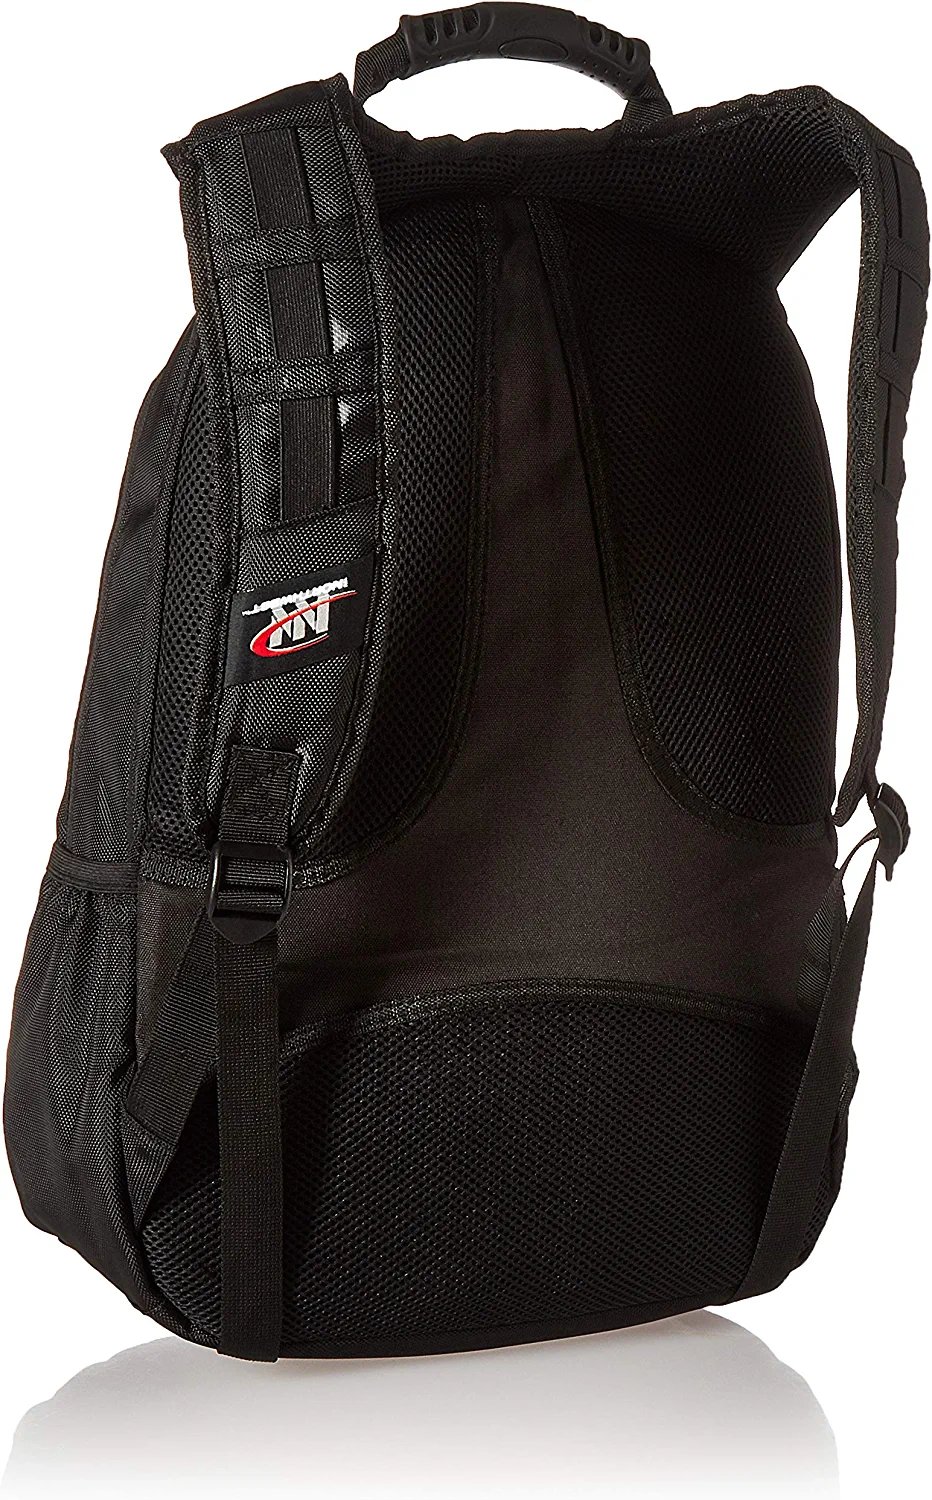 MLB Chicago Cubs “Phenom” 19”H x 8”L x 13”W Backpack - image 2 of 4